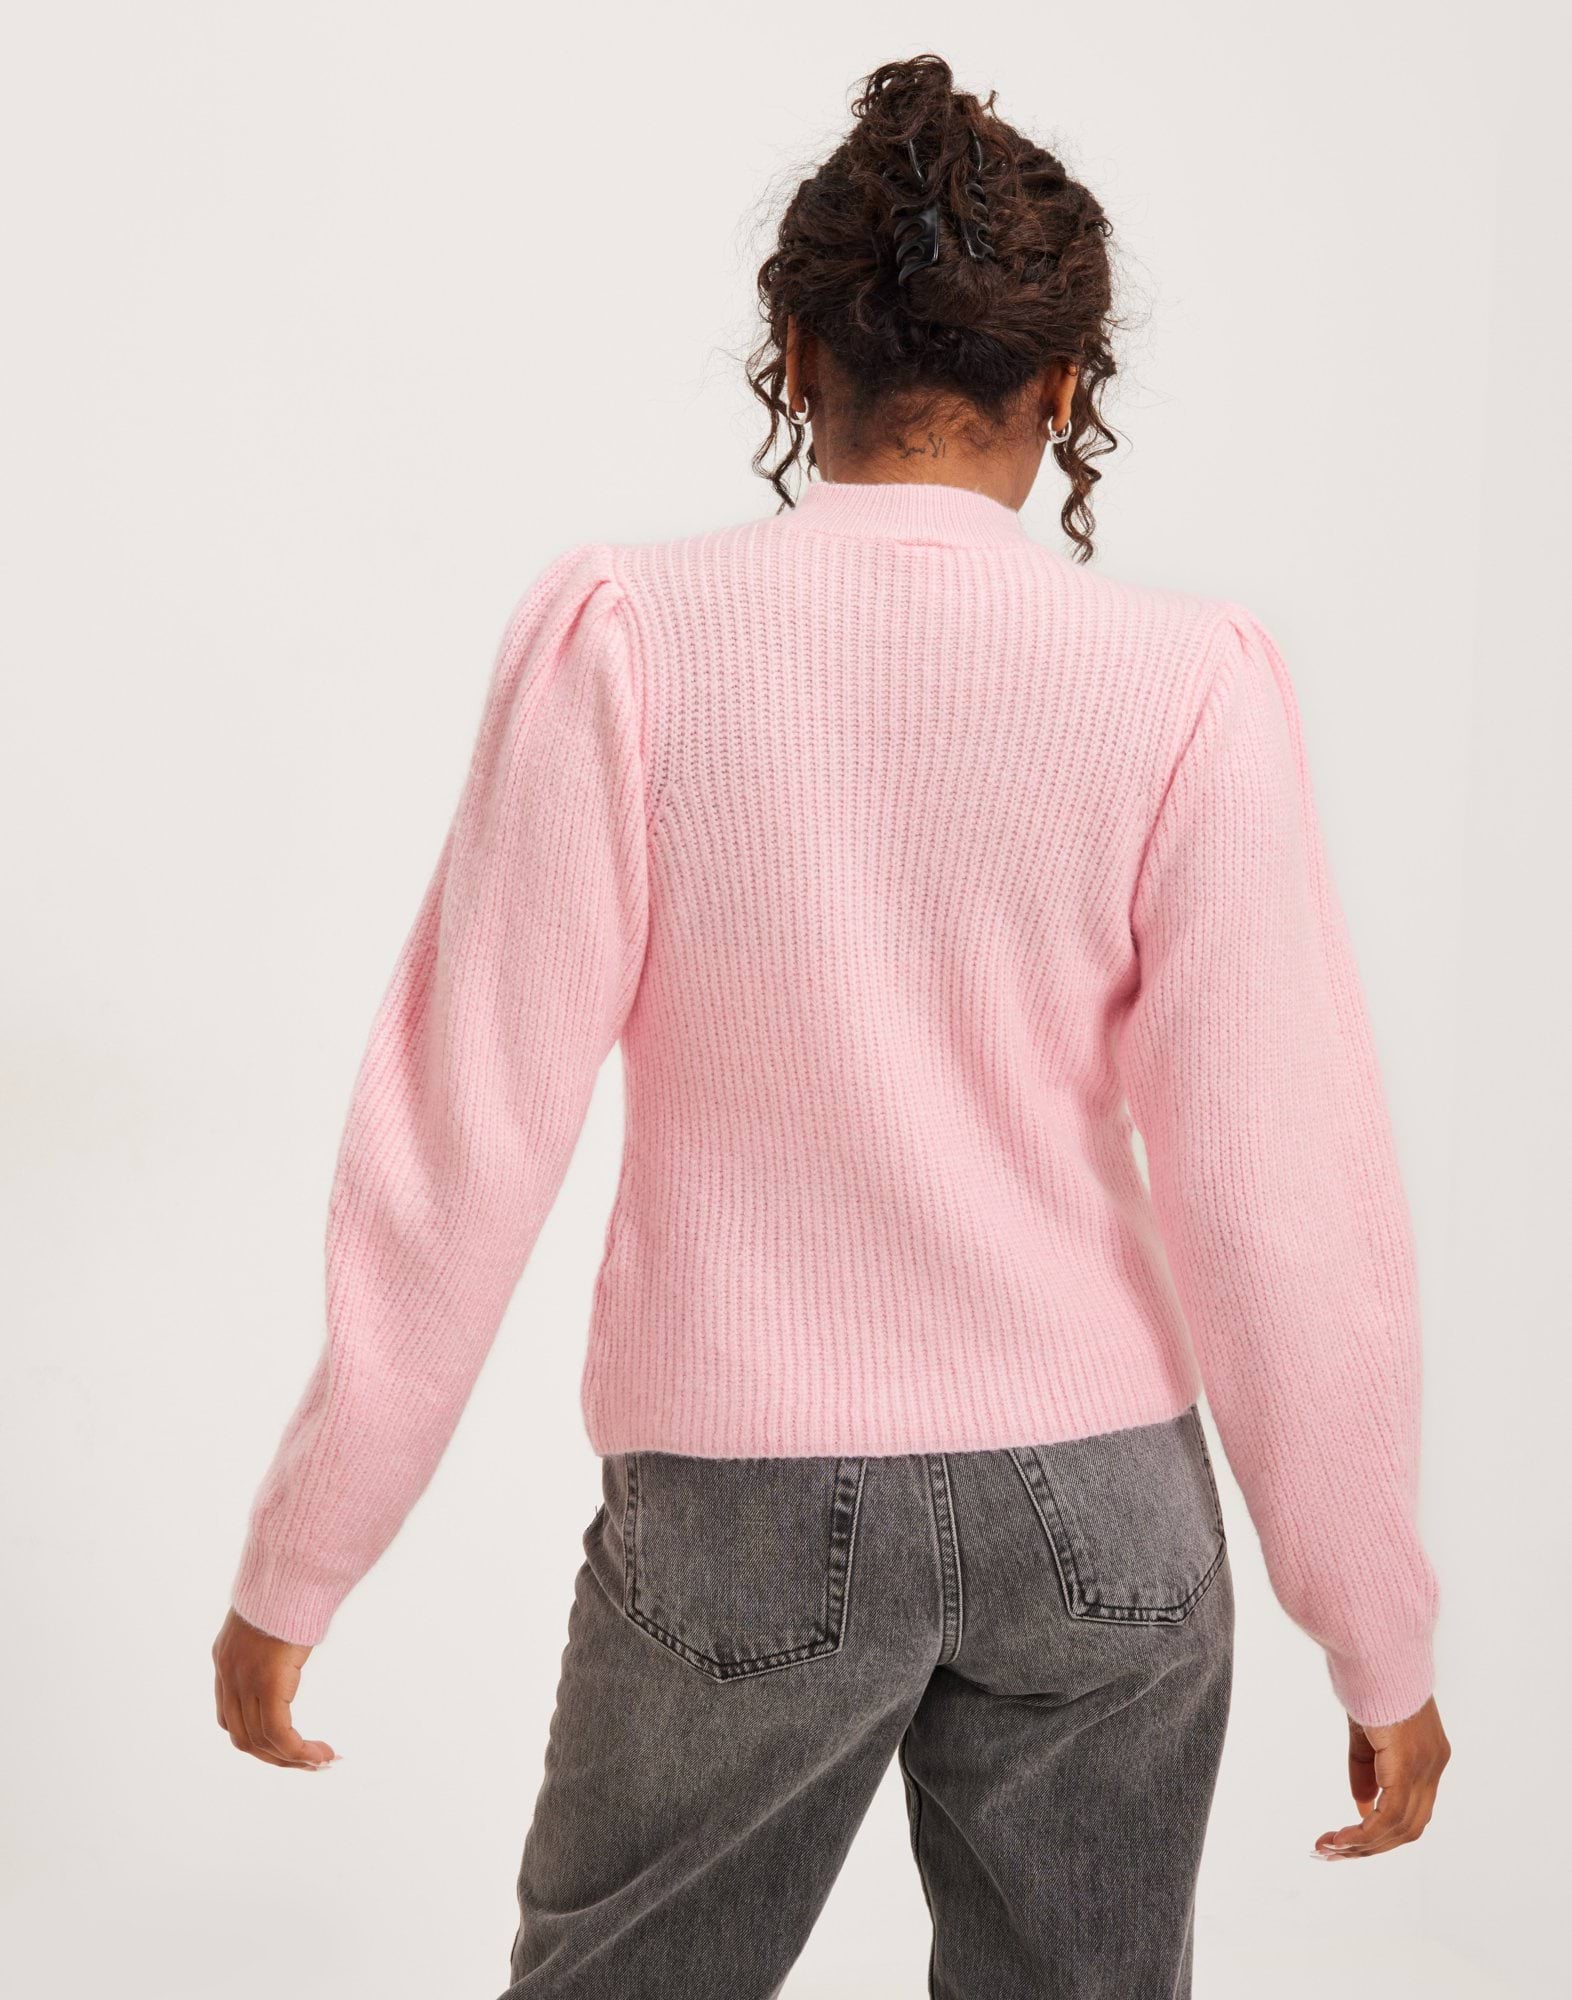 Fitted Body Knit Sweater